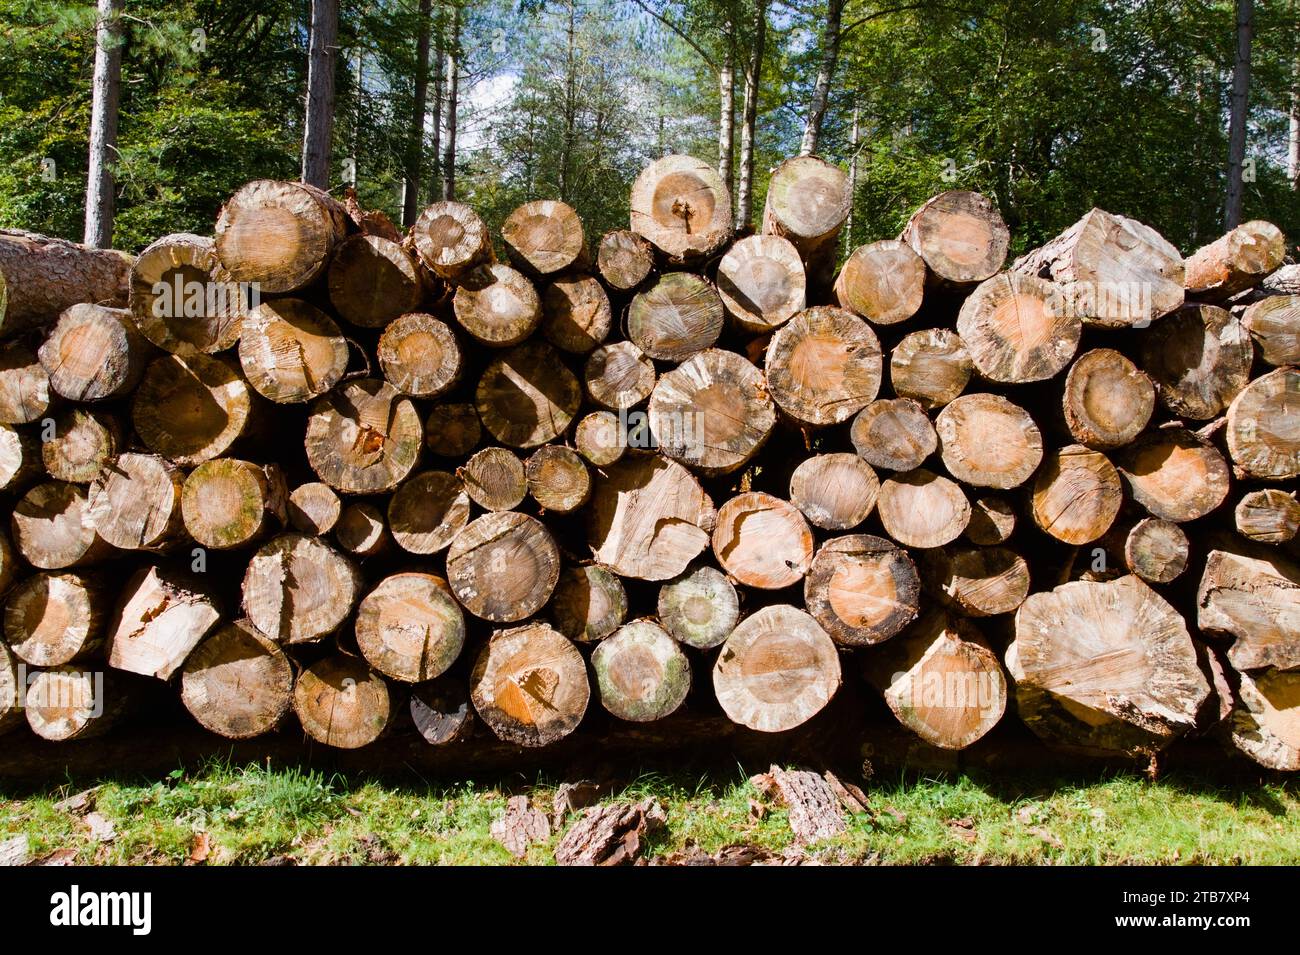 View End On Of A Stack Of Felled Pine Trees In The Forest, New Forest UK Stock Photo